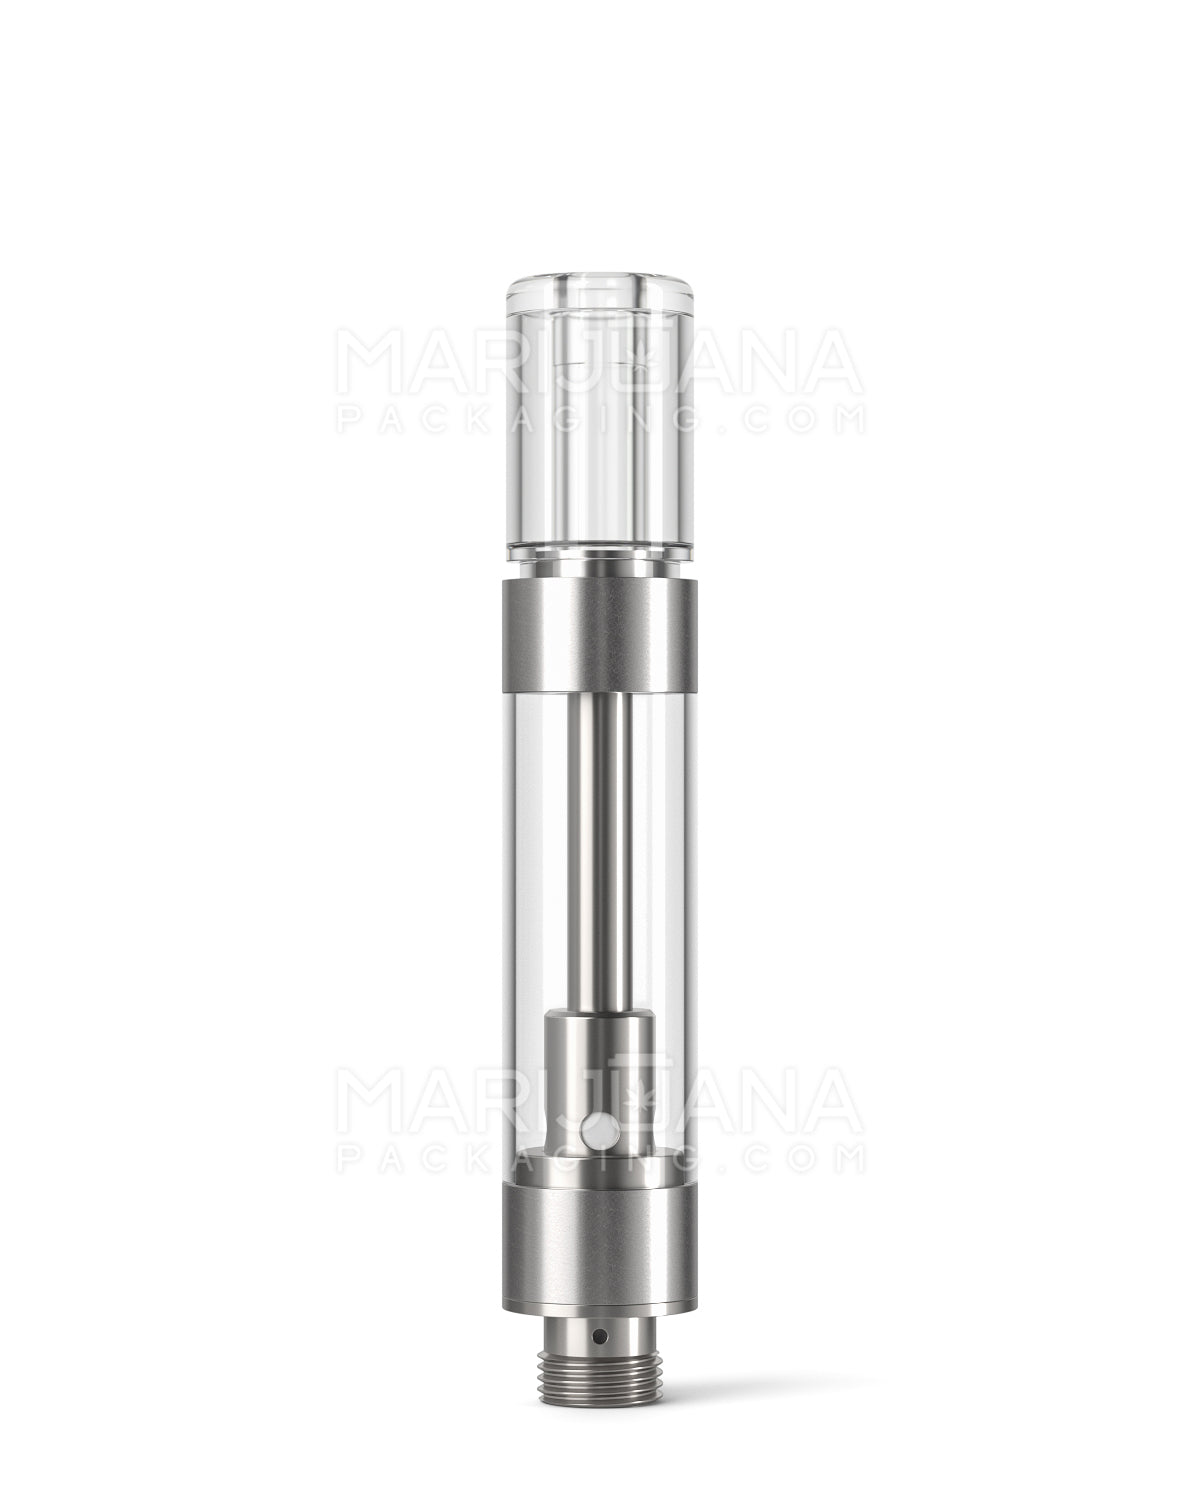 CCELL | Liquid6 Reactor Plastic Vape Cartridge with Barrel Clear Plastic Mouthpiece | 1mL - Press On - 100 Count - 1